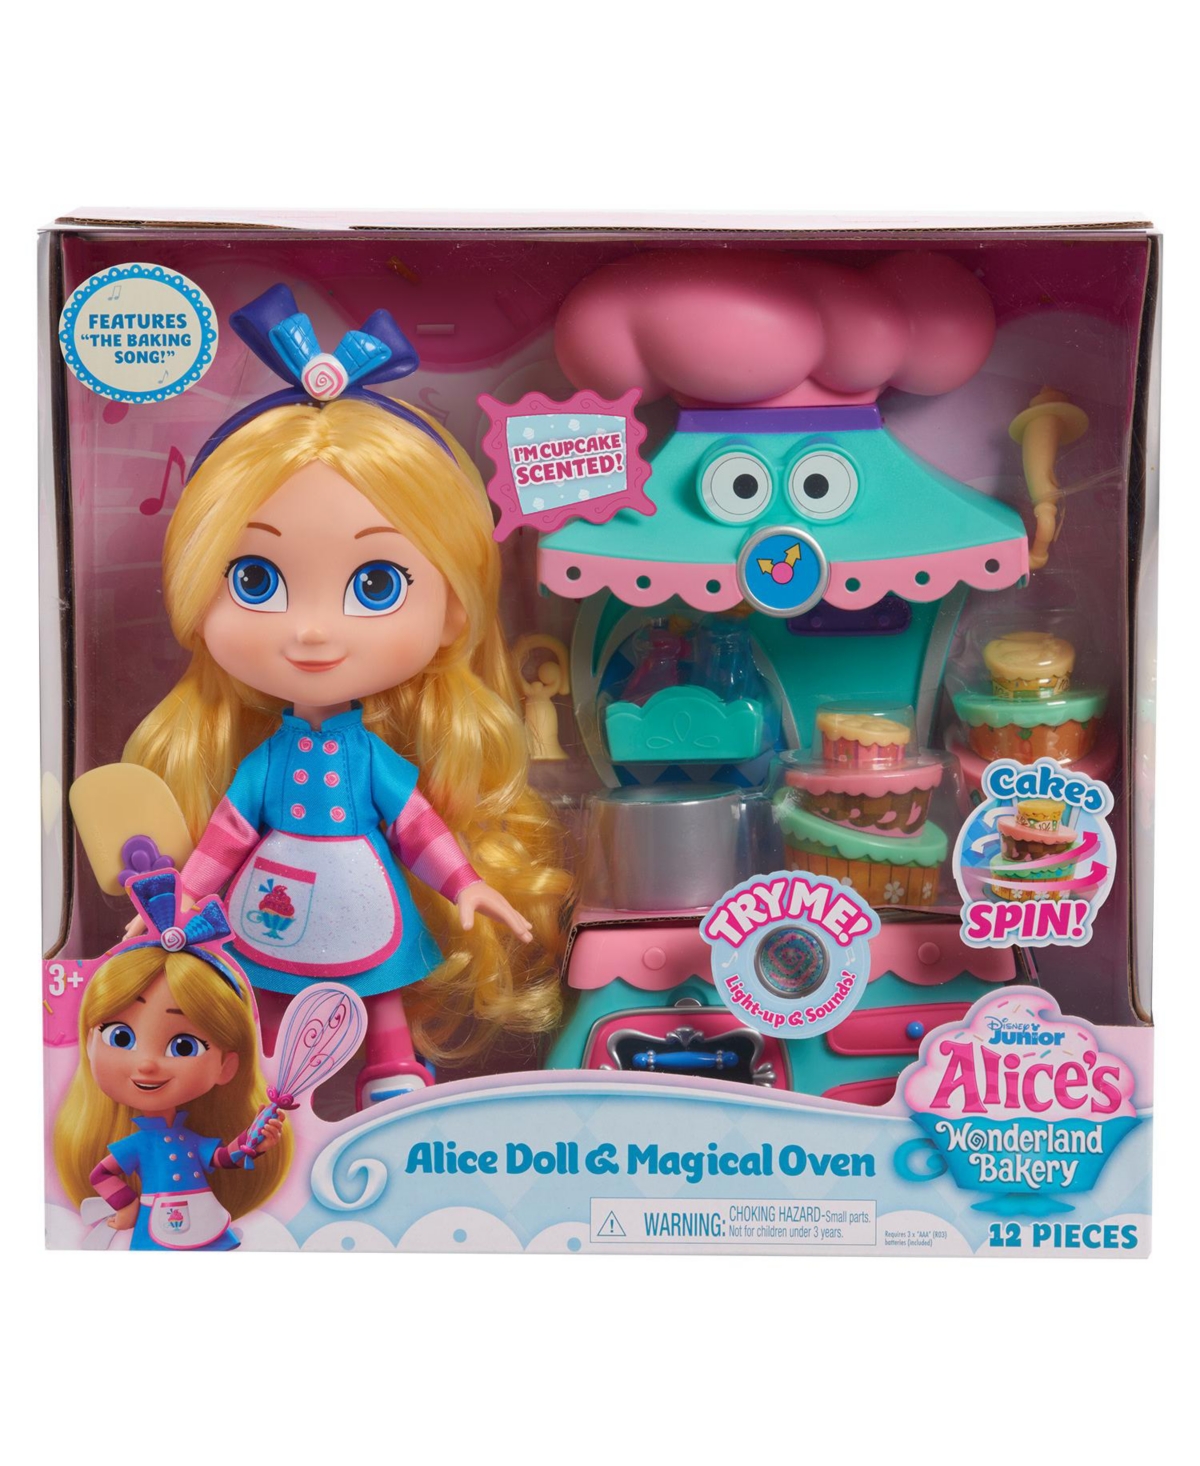 Alice's Wonderland Bakery Kids' Closeout!  Alice Doll And Magical Oven Set, 8 Piece In Multi